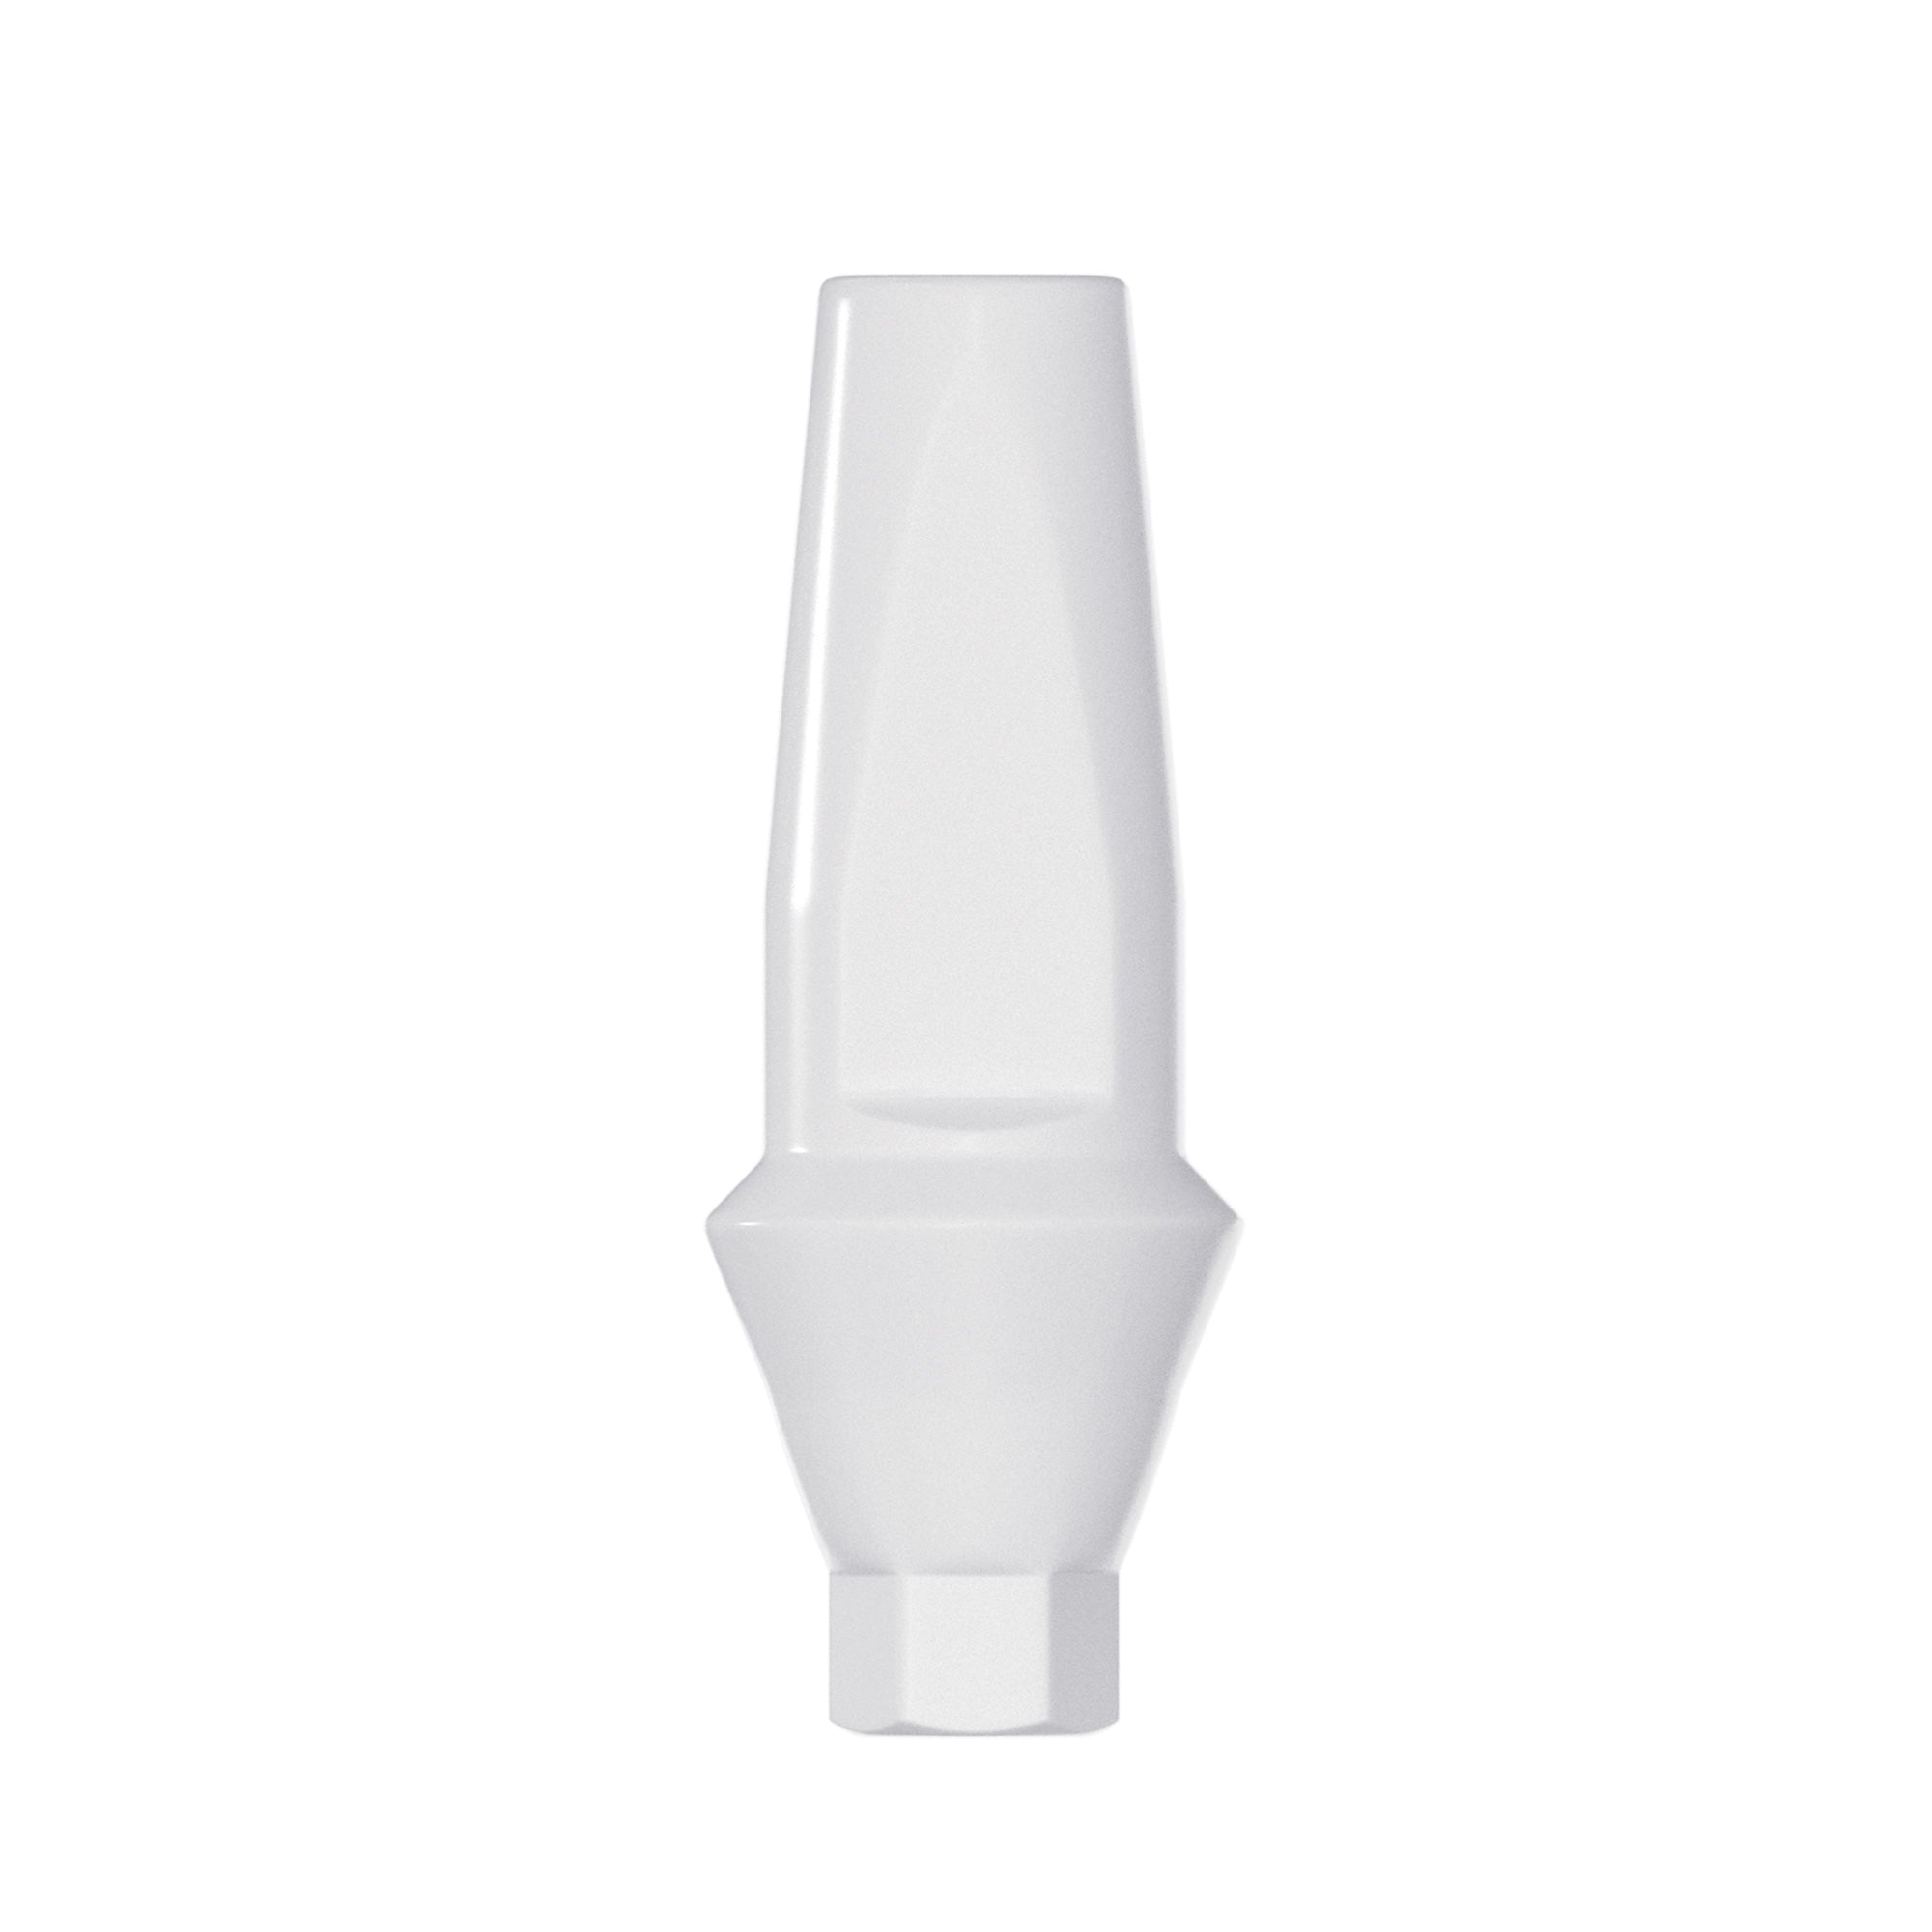 DSI Temporary Straight PEEK Abutment 4.75mm- Conical Connection NP Ø3.5mm